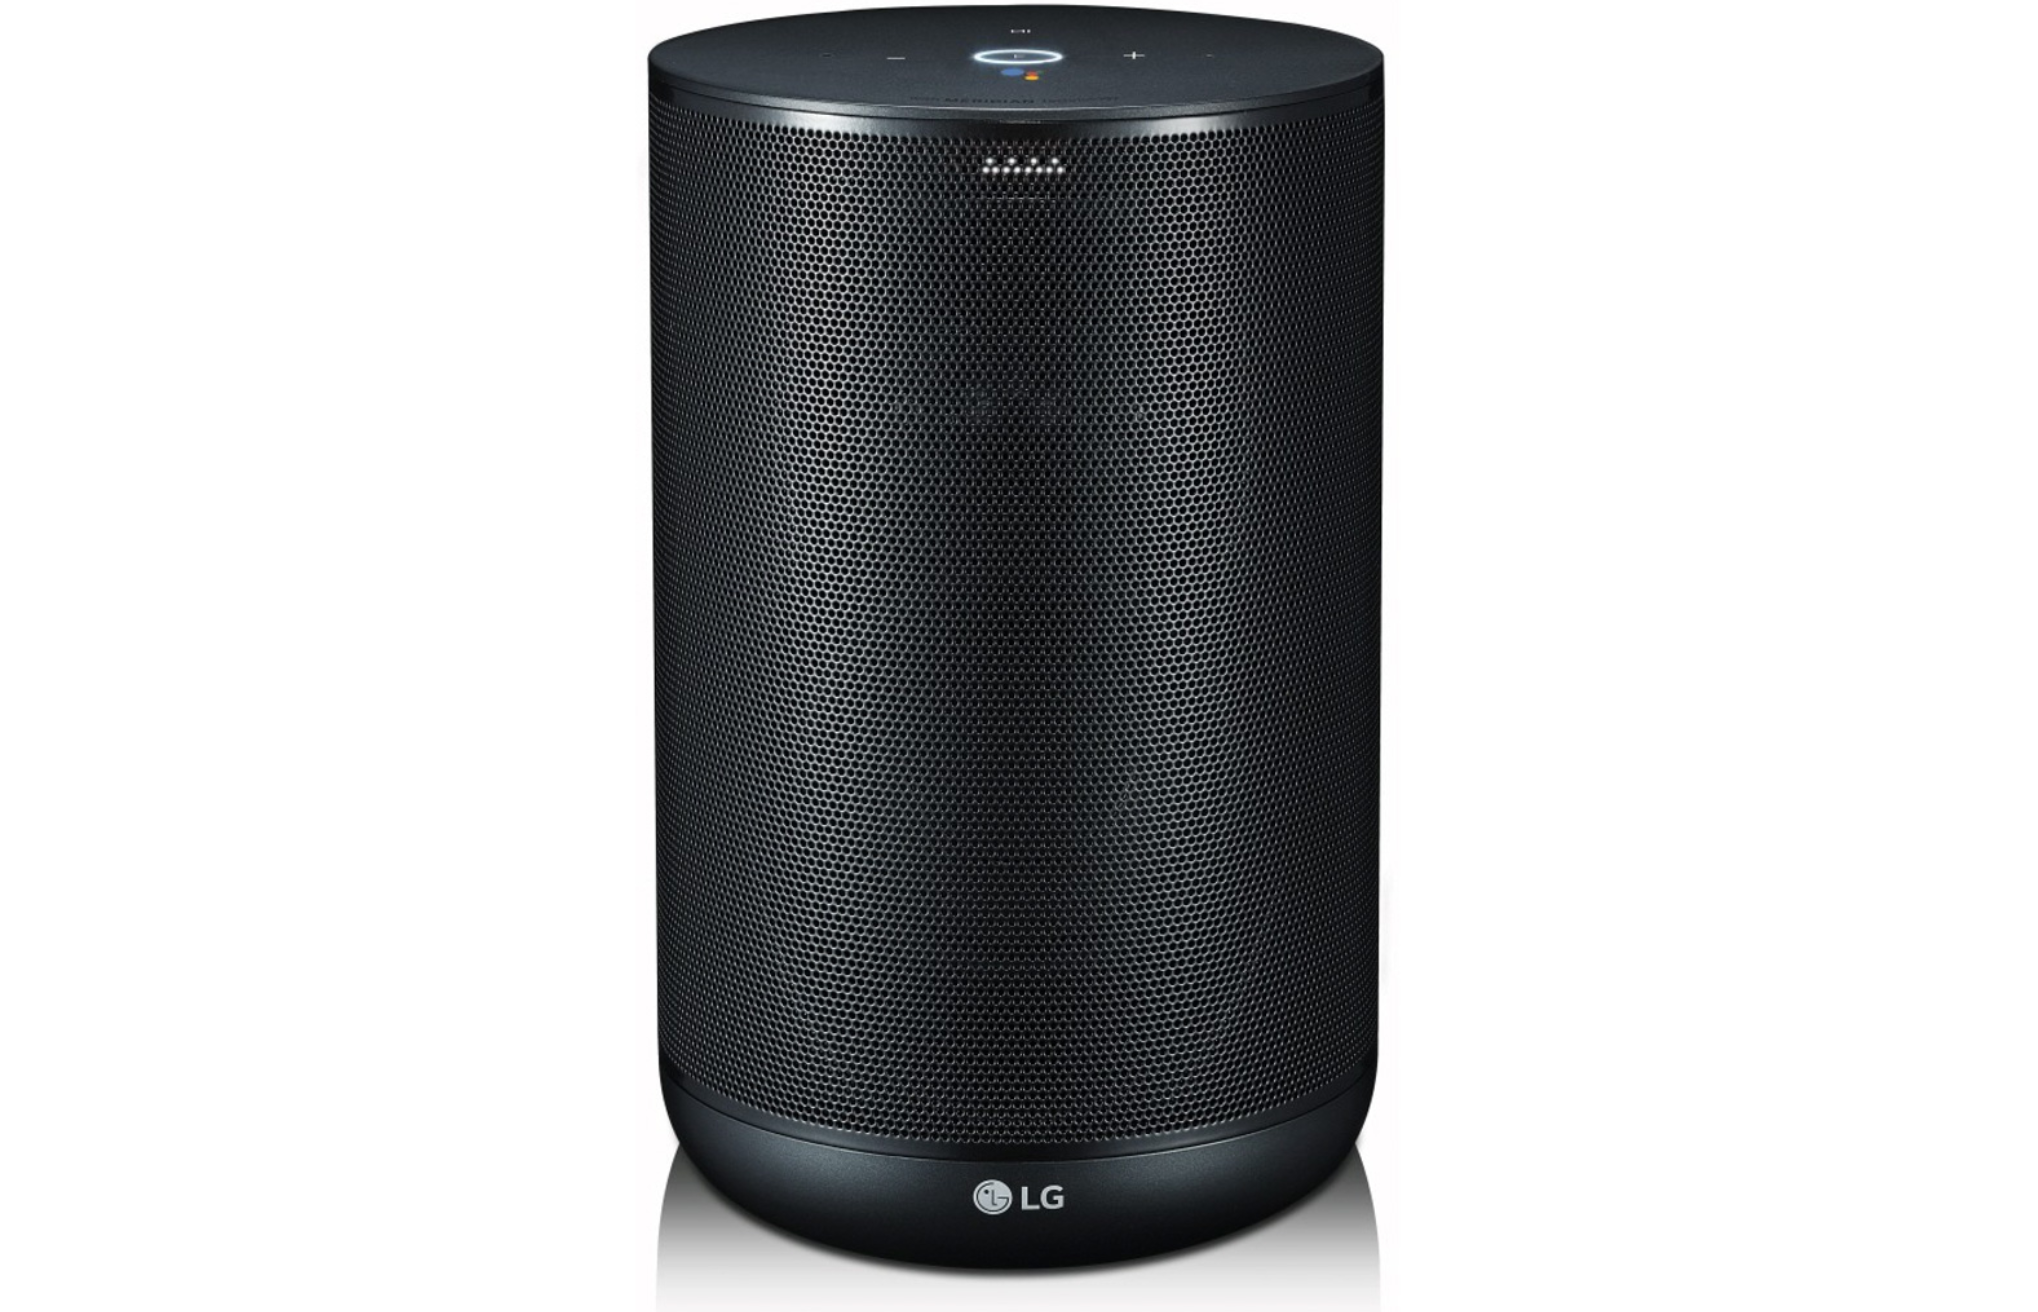 LG debuts the ThinQ, a Google Assistant-powered smart speaker